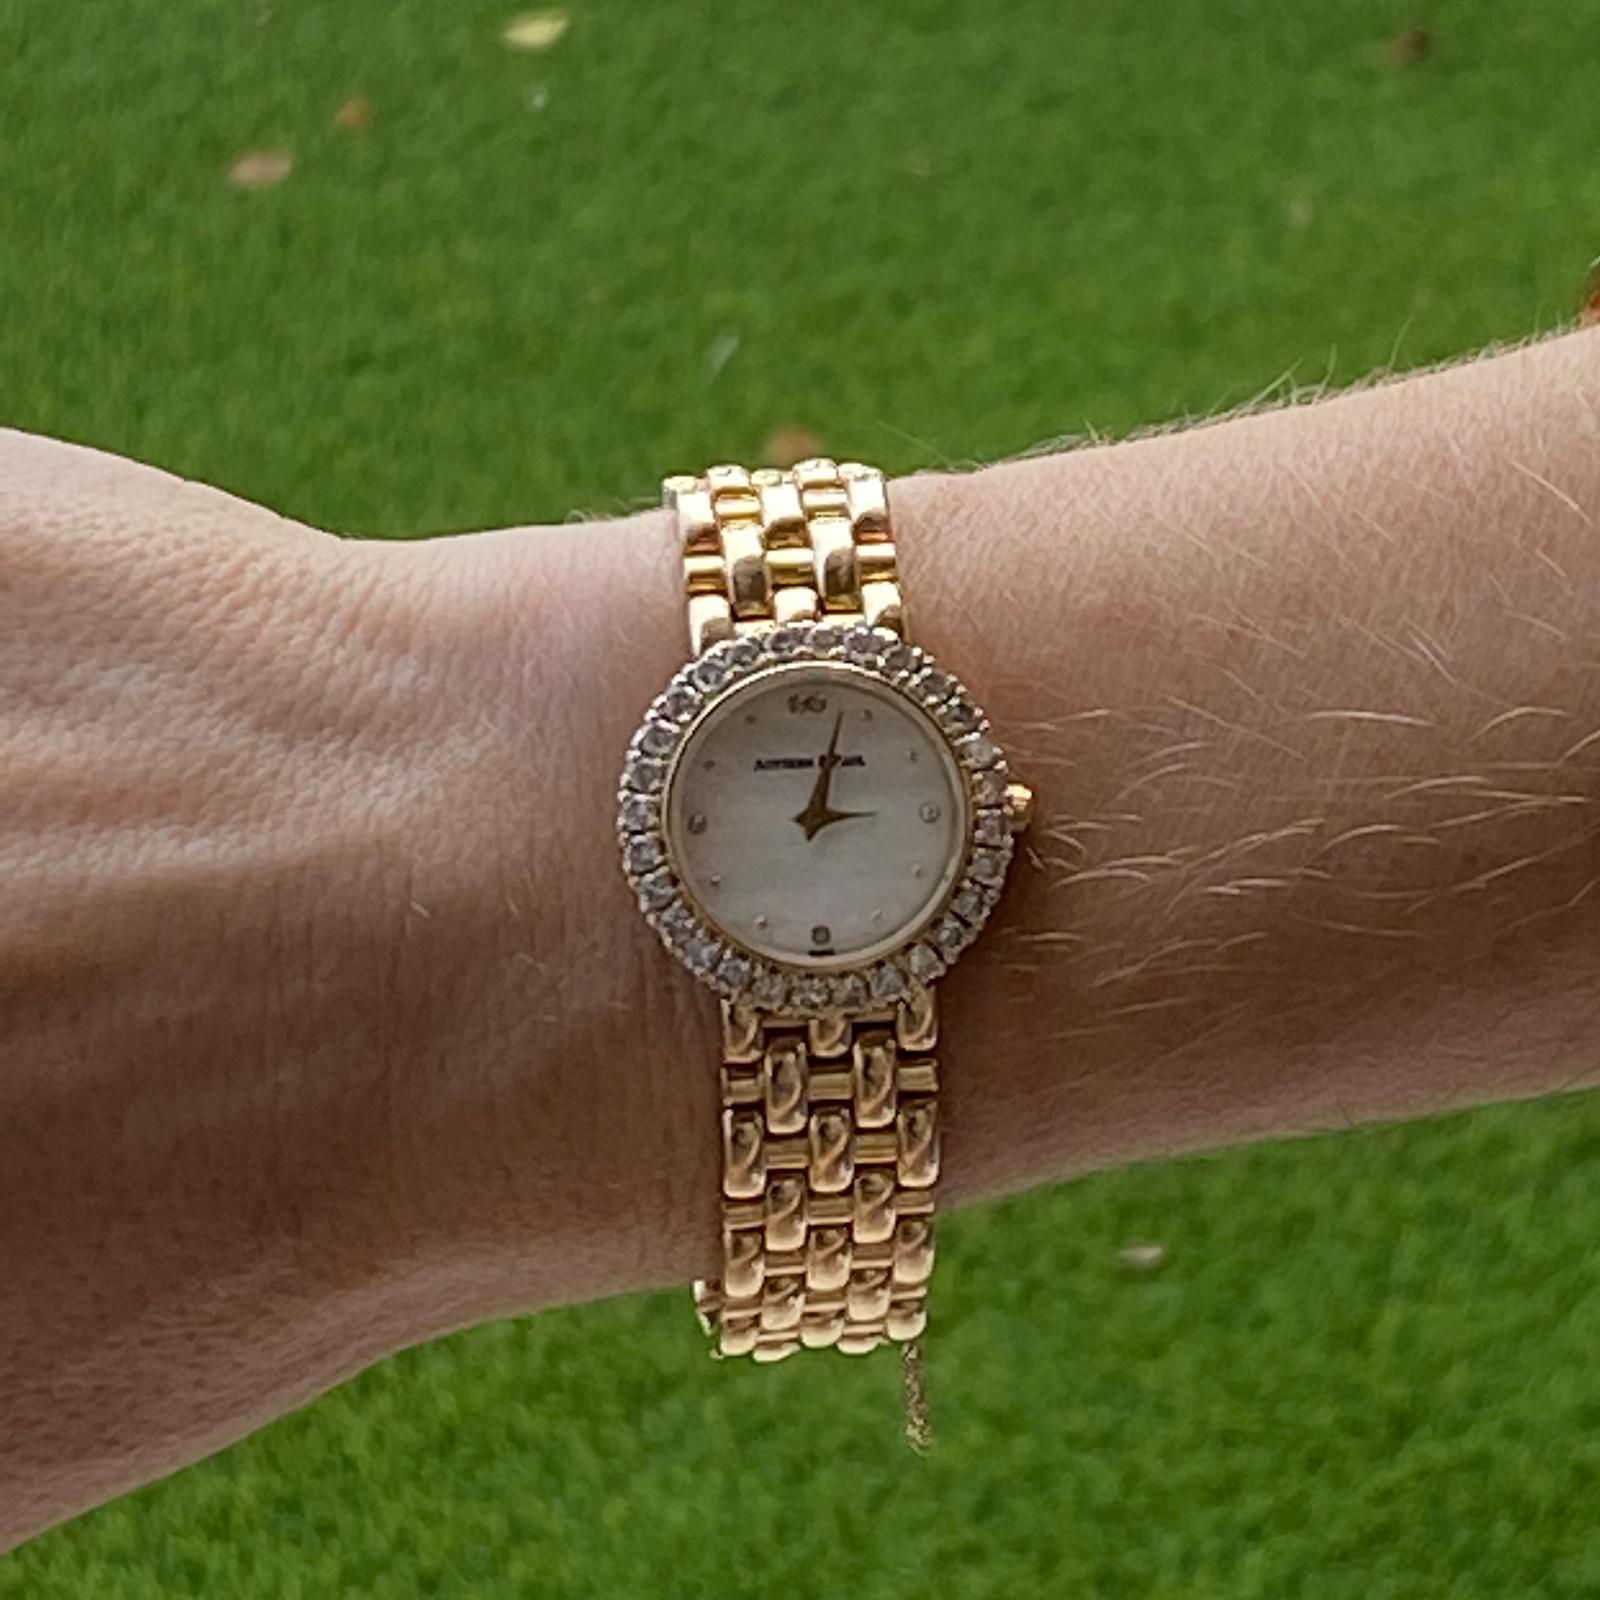 Austern & Paul 28mm ladies watch fashioned in 14 karat yellow gold. The watch features a mother of pearl dial, diamond bezel weighing approximately 1.50 carat total weight, and gold link bracelet. New battery, all original links, and perfect working